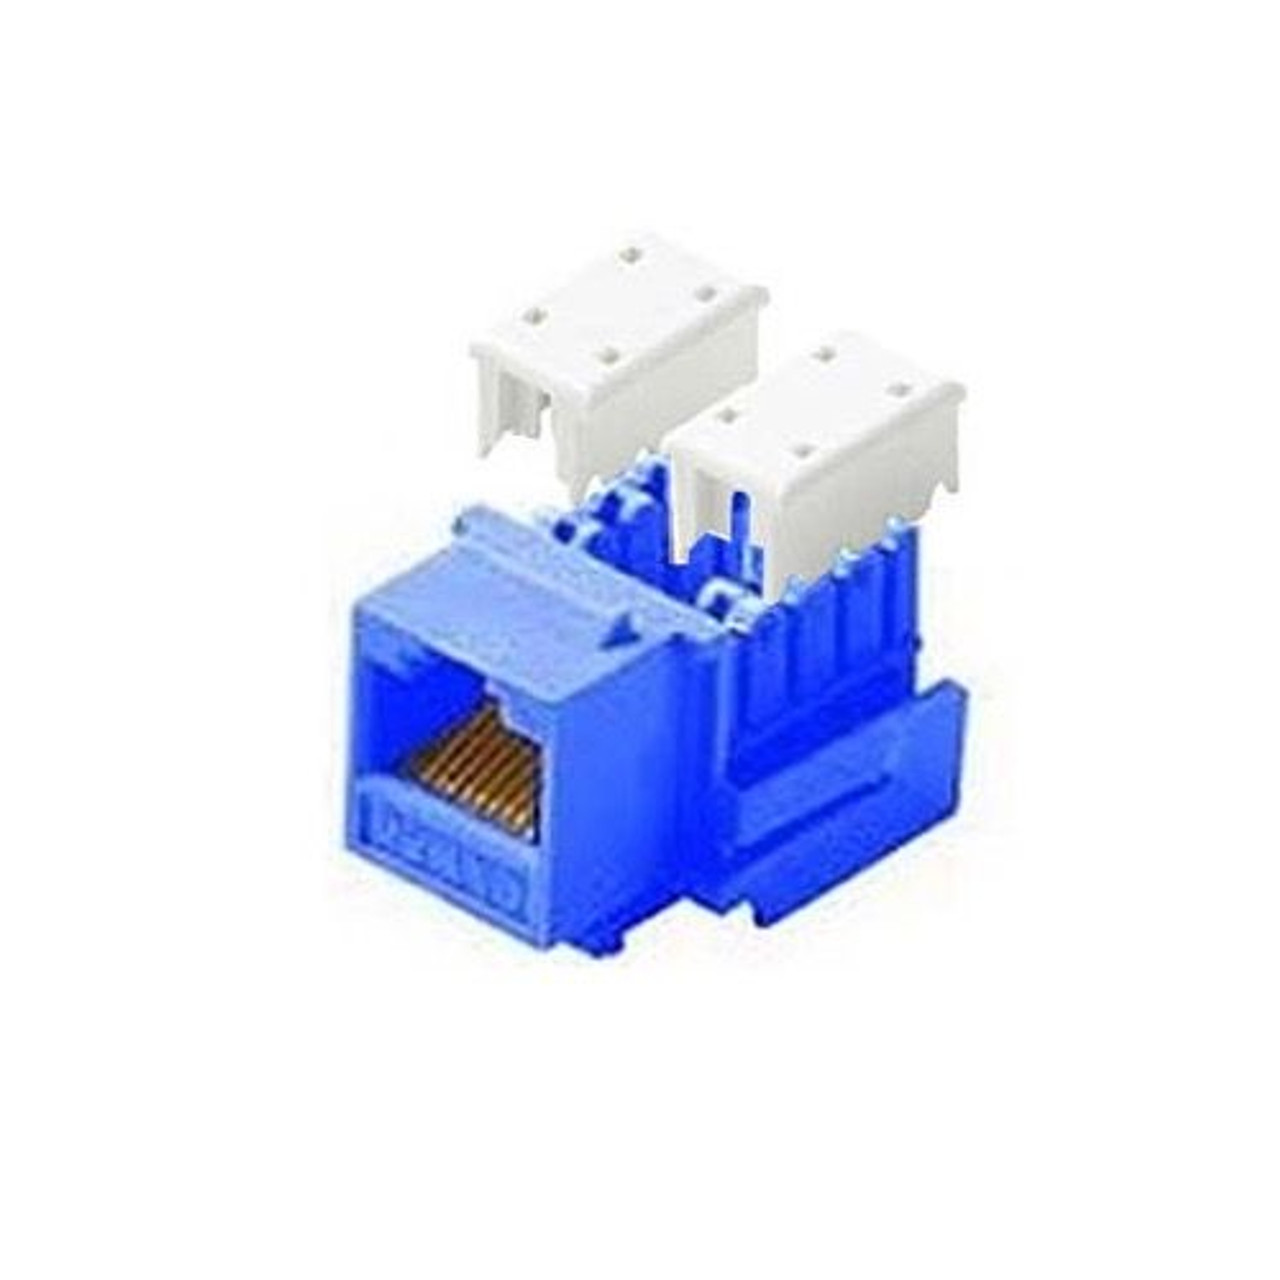 Eagle CAT5E Keystone Jack Insert Blue RJ45 110 Style 8P8C IDC RJ45 Connector Contacts One Piece RJ-45 8P8C Modular Cat 5e Network QuickPort 8 Wire Telephone Snap-In Computer Datacom Insert